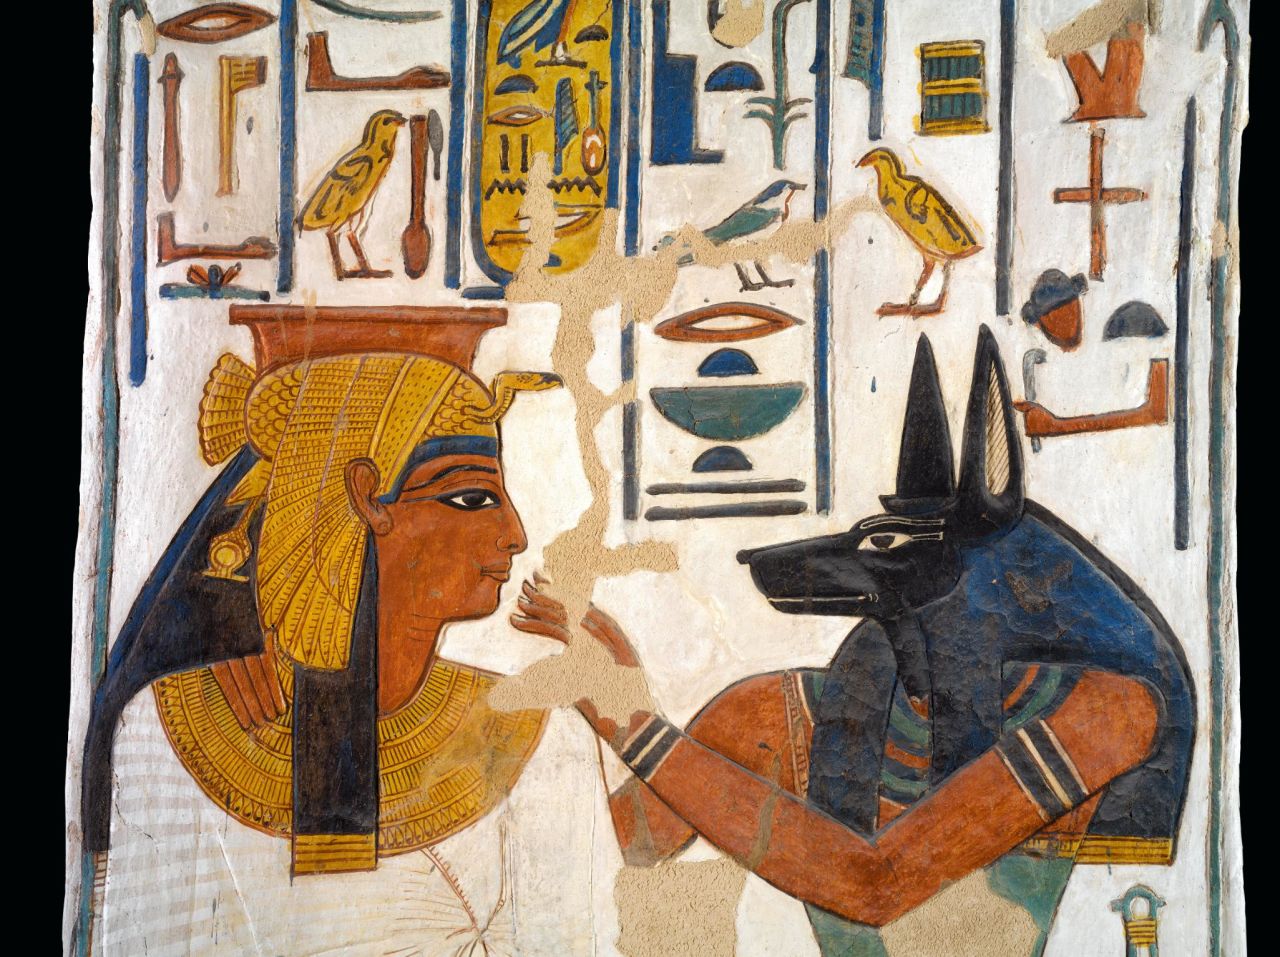 "To tell more the soul of the object than just the object itself," Vannini said. This image shows the tomb of Nefertari-Nefertari and the jackal-headed Anubis. 